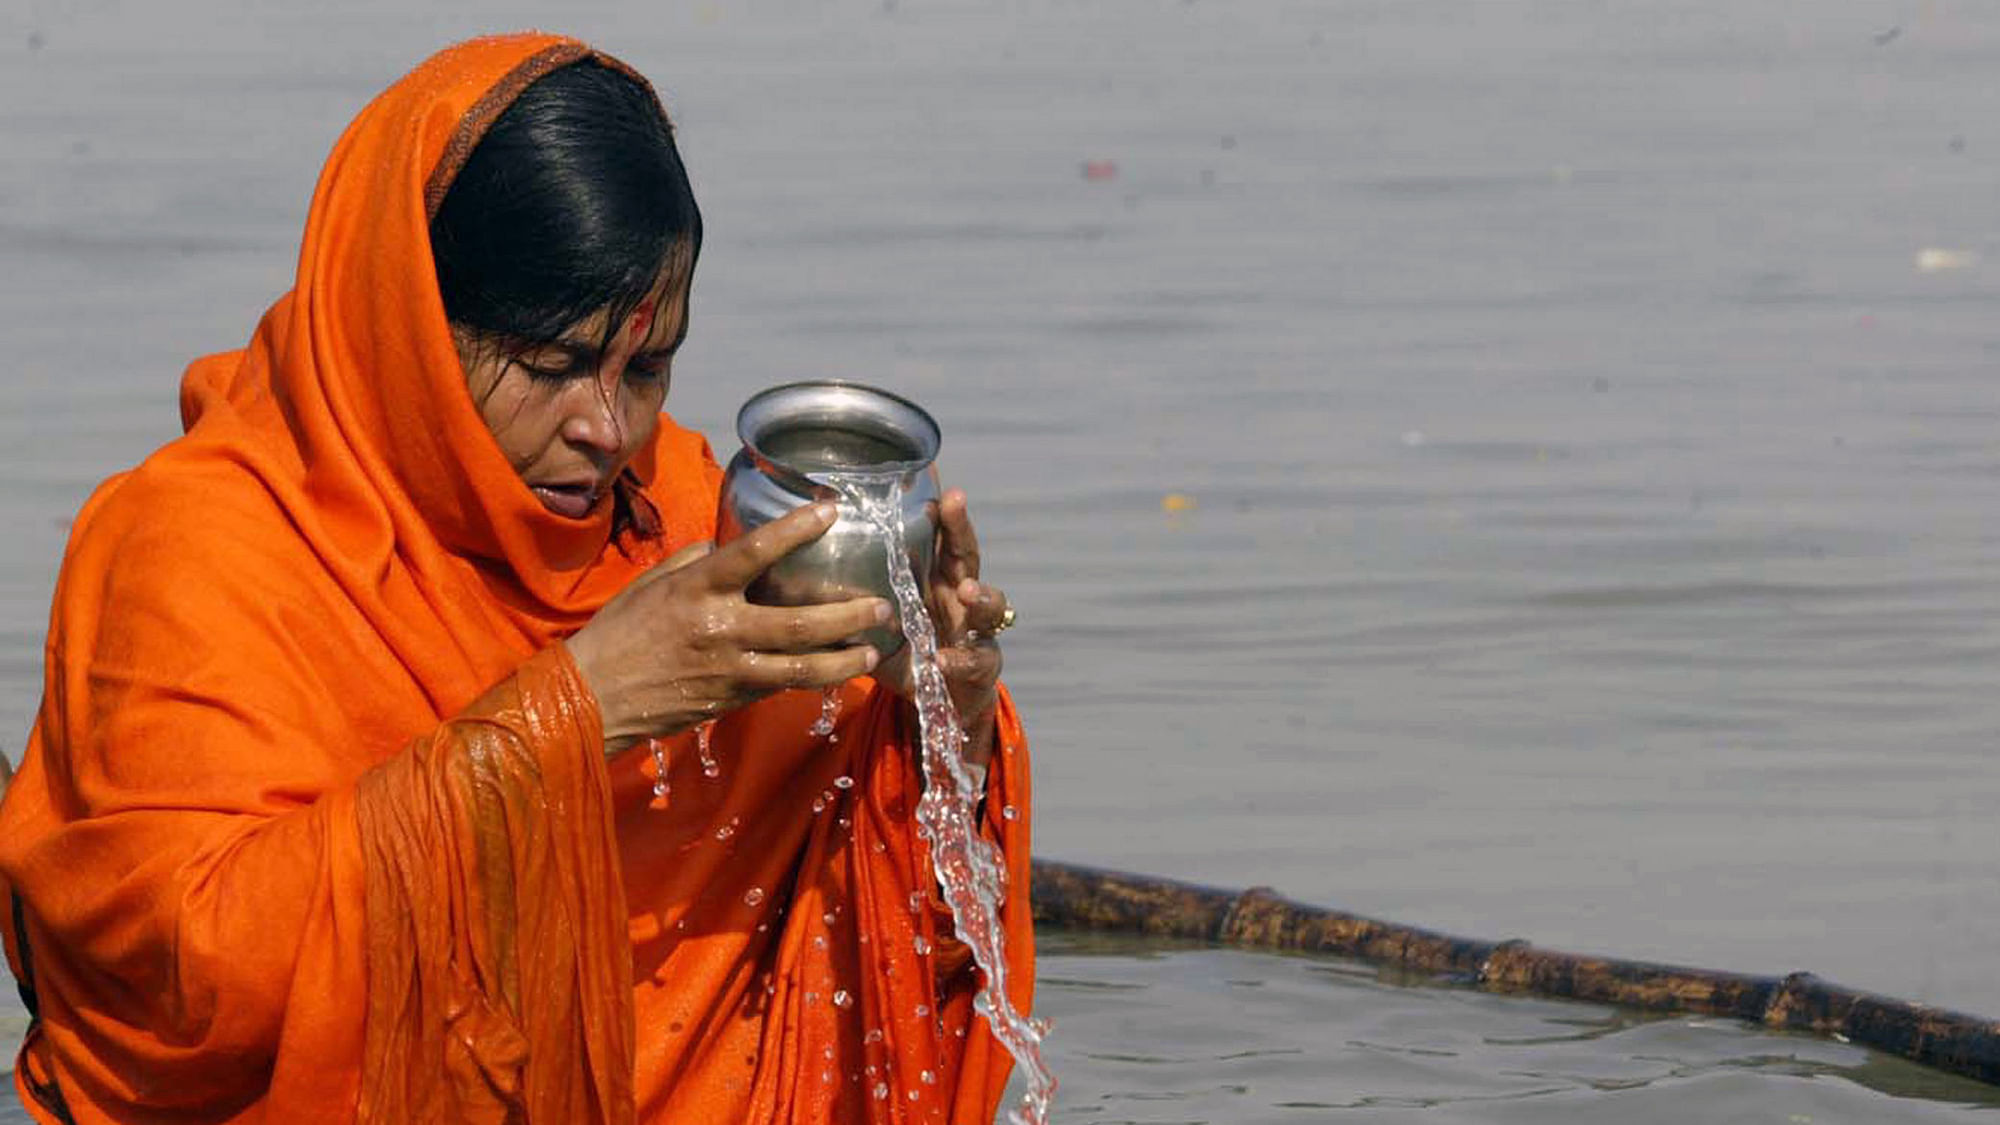 Uma Bharti performs prayers after a taking a dip in the Saryu river during the Makar Sankranti festival in  Ayodhya on 14 January 2006. (Photo: Reuters/Raj Patidar)